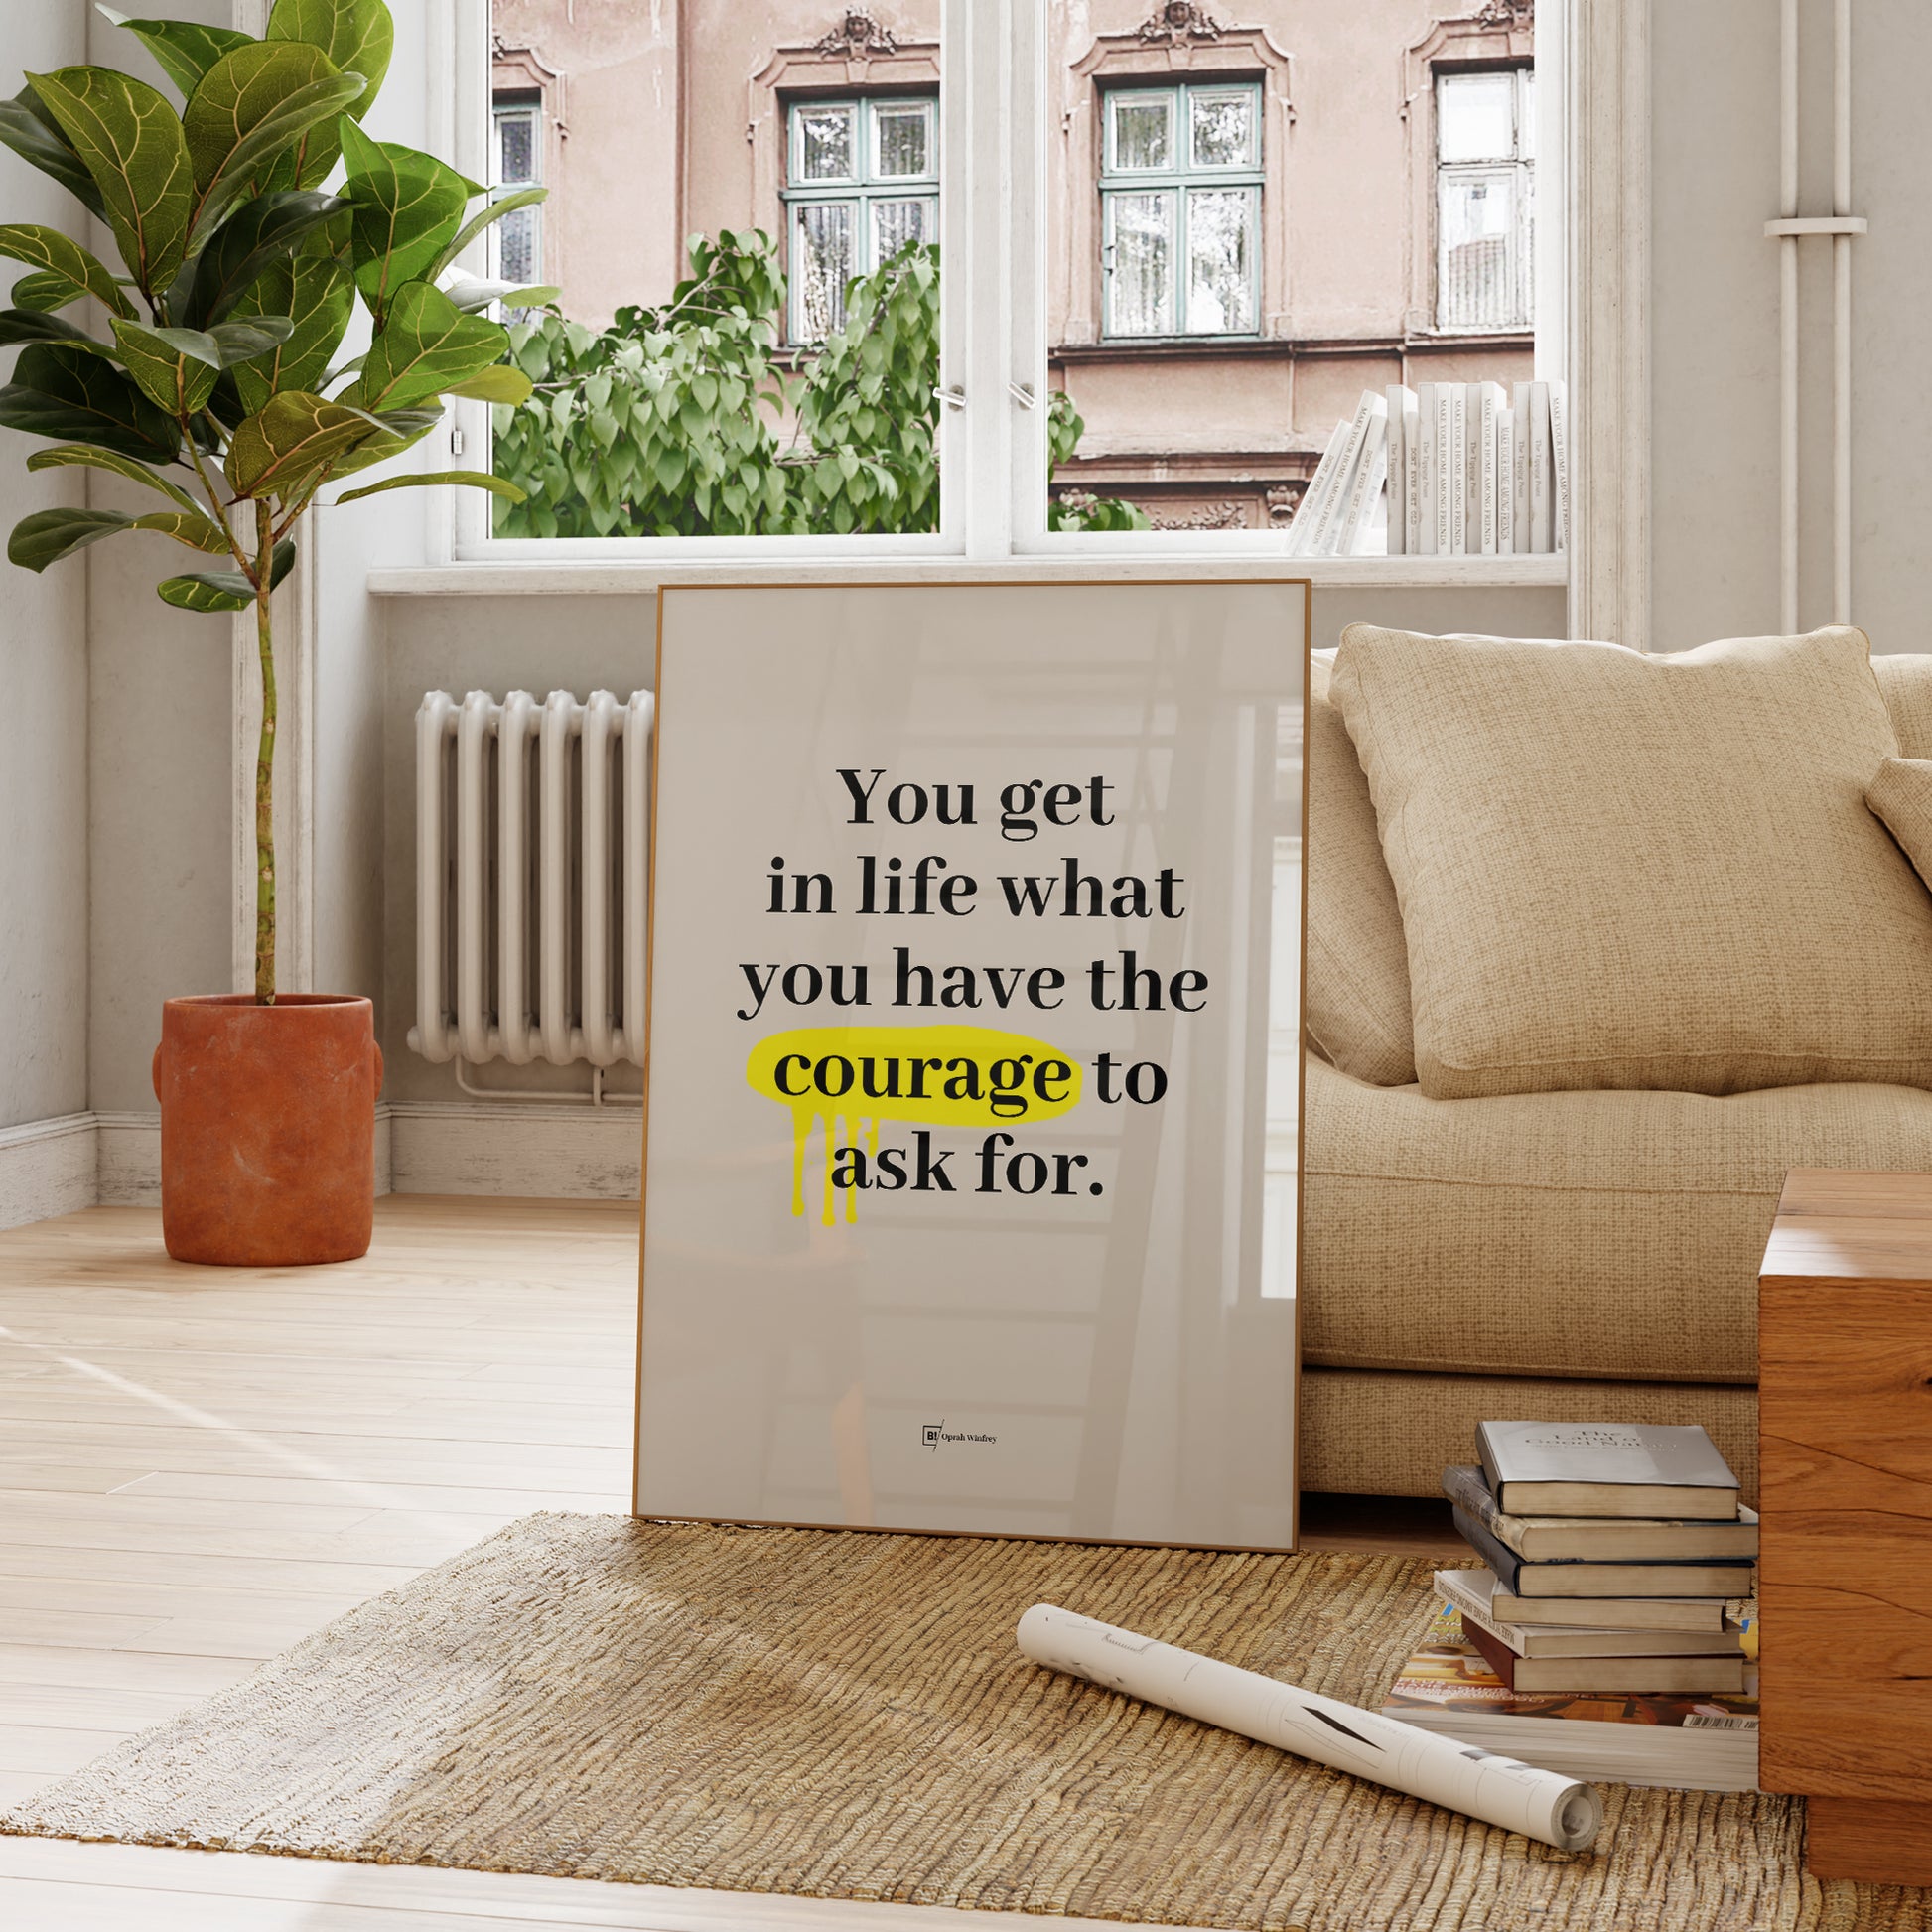 Be inspired by Oprah Winfrey's famous "You get in life what you have the courage to ask for" quote art print. This artwork was printed using the giclée process on archival acid-free paper and is presented in a french living room that captures its timeless beauty in every detail.